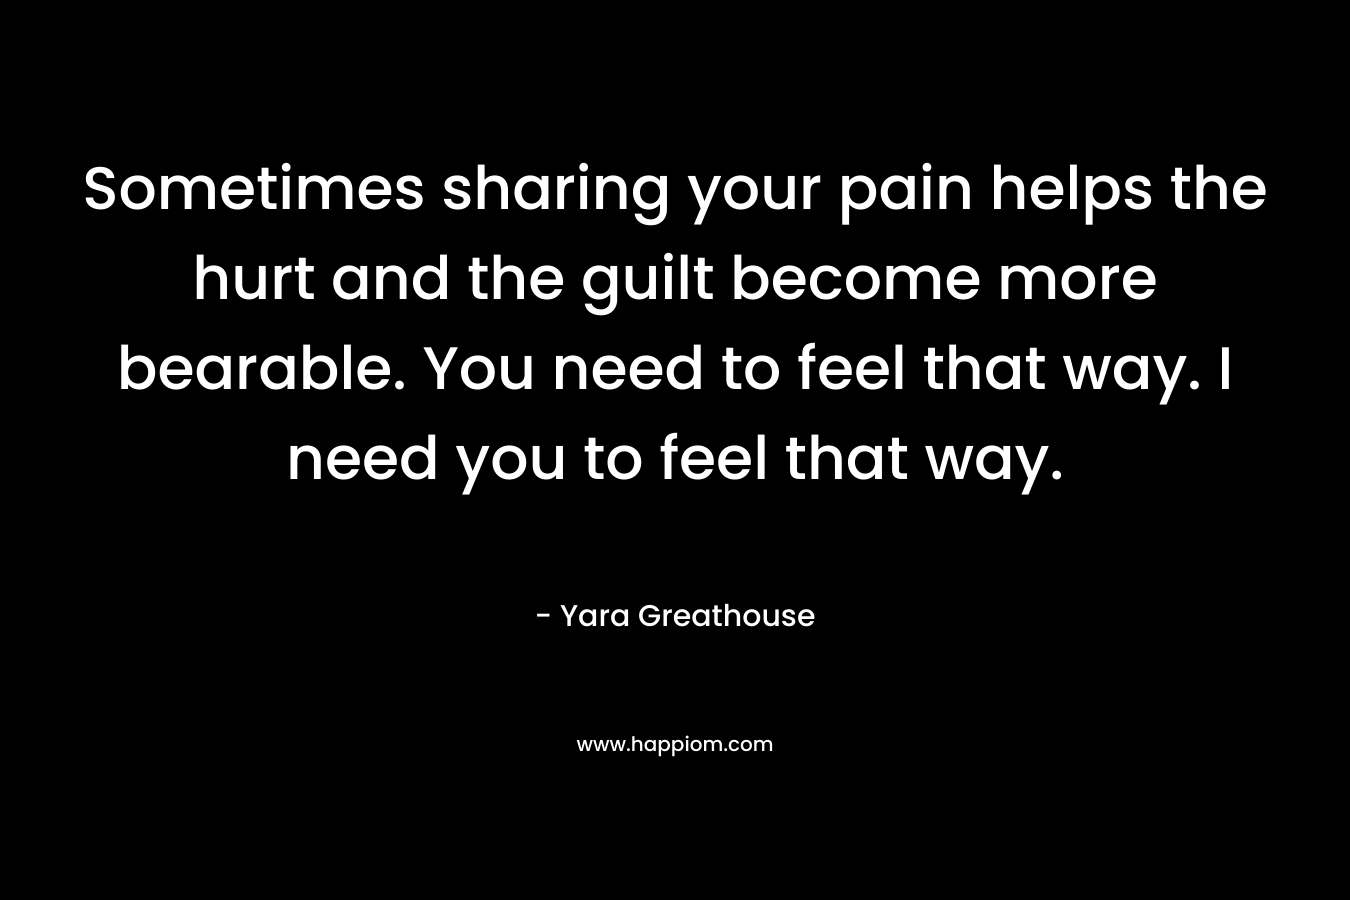 Sometimes sharing your pain helps the hurt and the guilt become more bearable. You need to feel that way. I need you to feel that way.